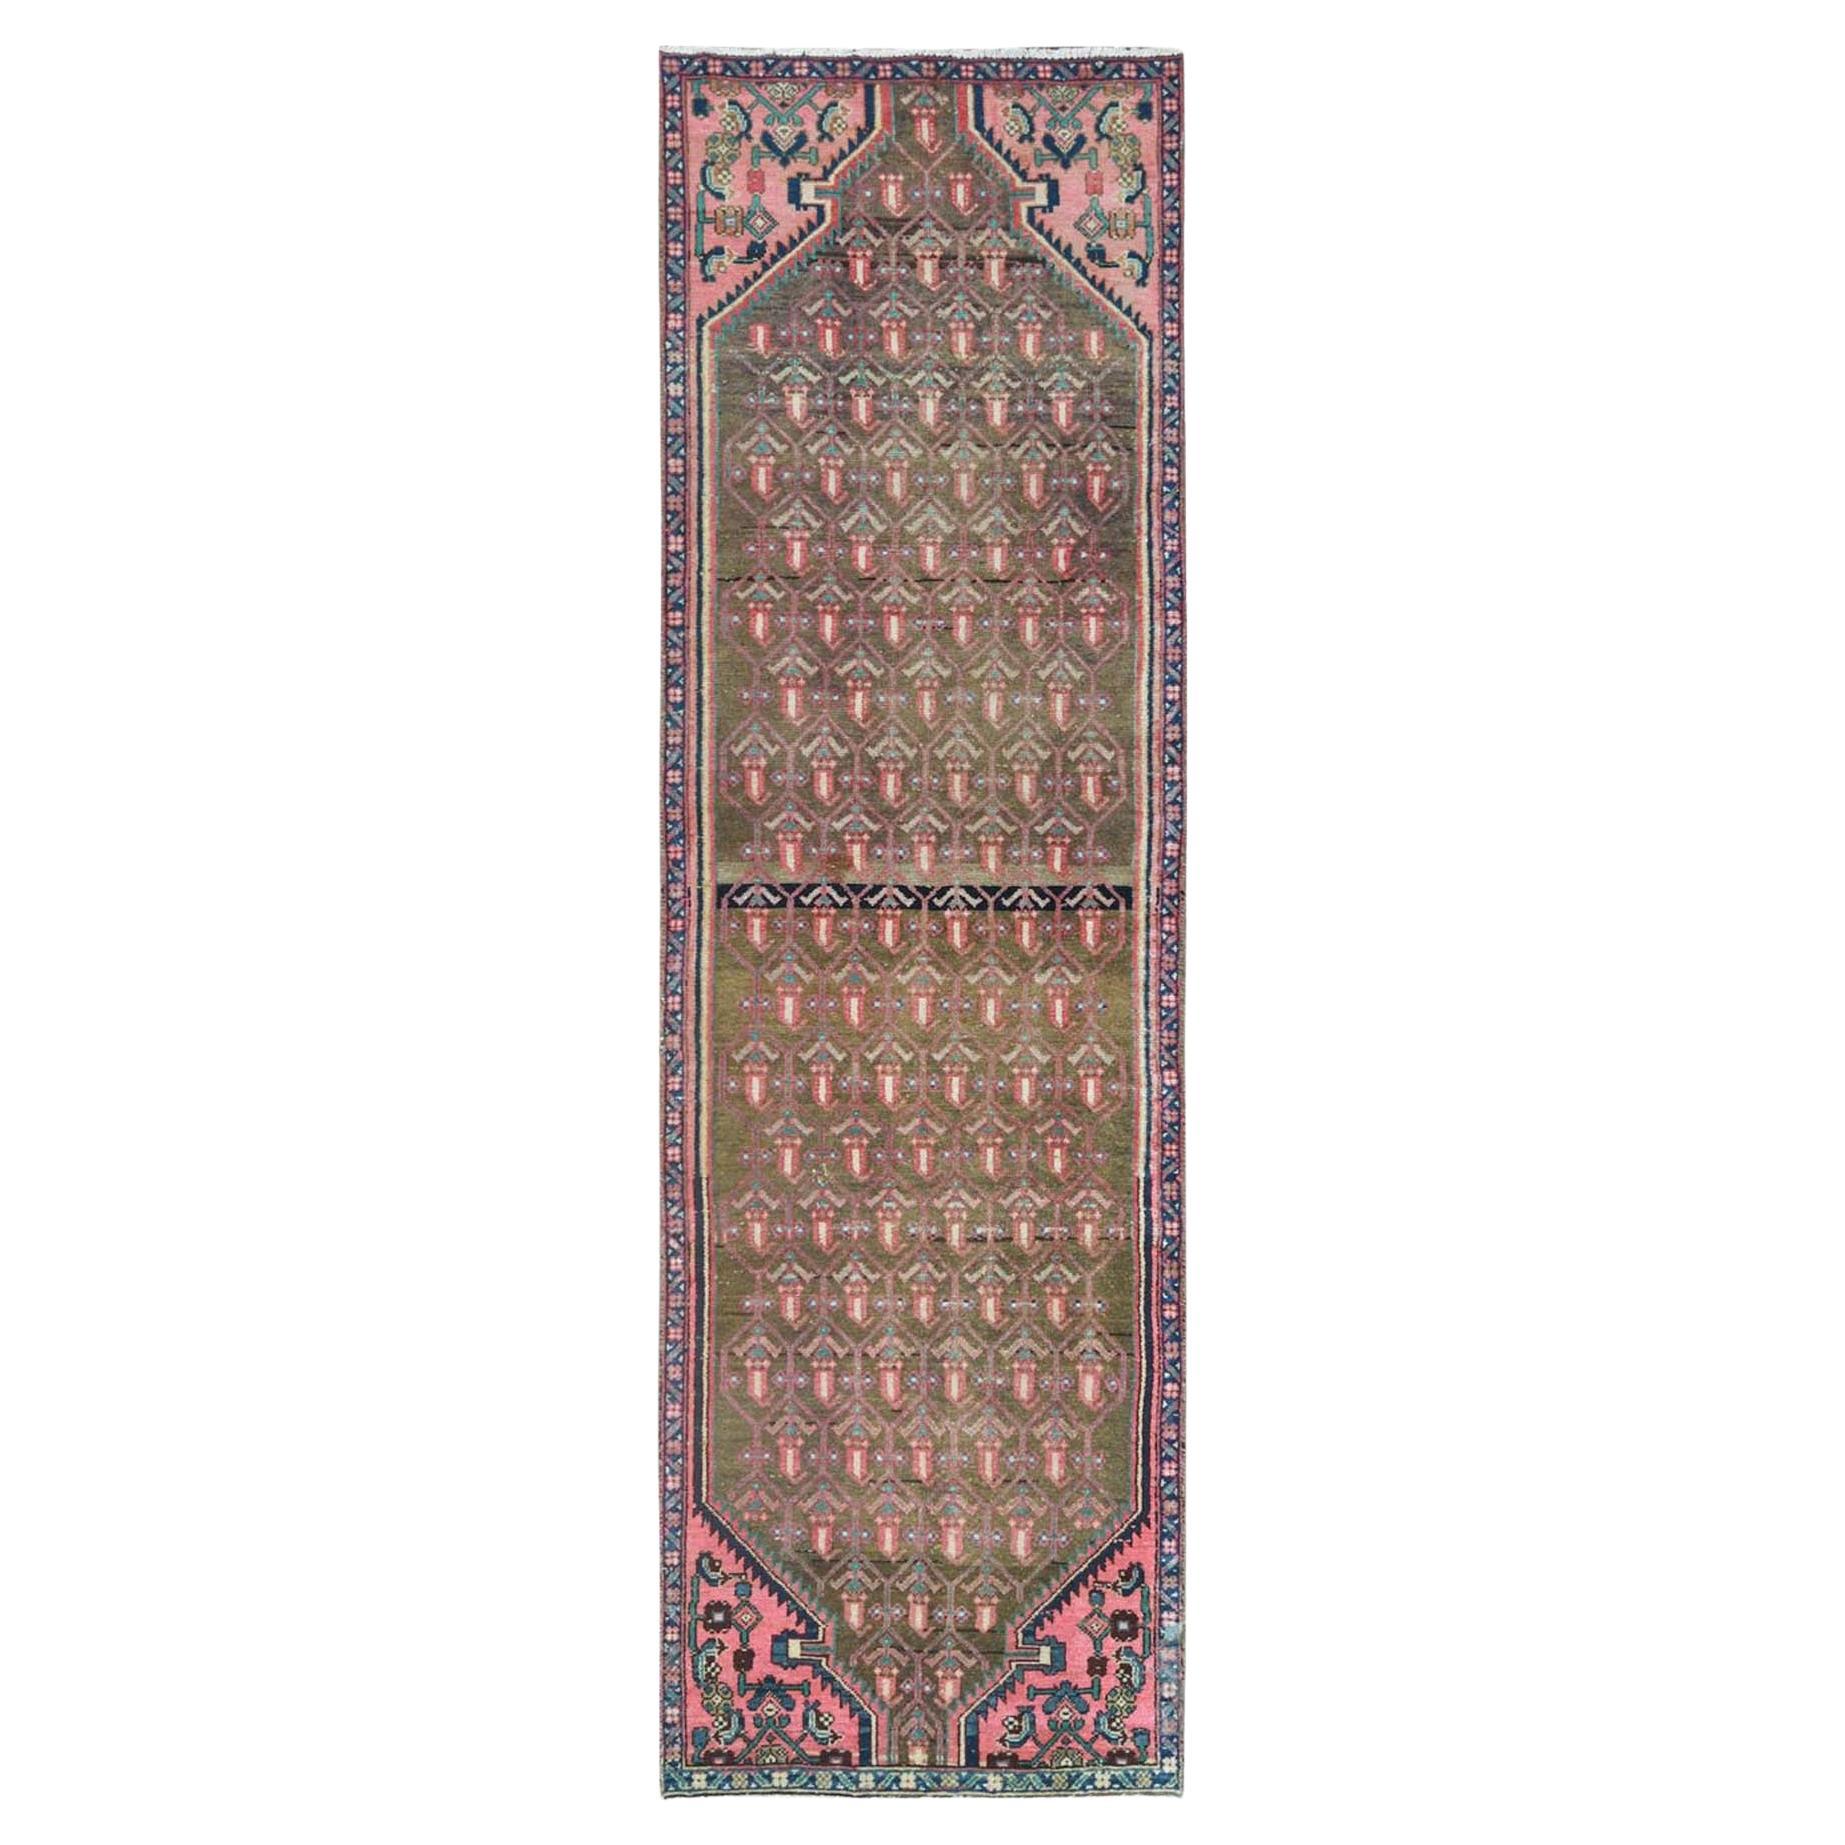 Apricot Color Vintage Persian Hamadan Worn Wool Distressed Look Hand Knotted Rug For Sale